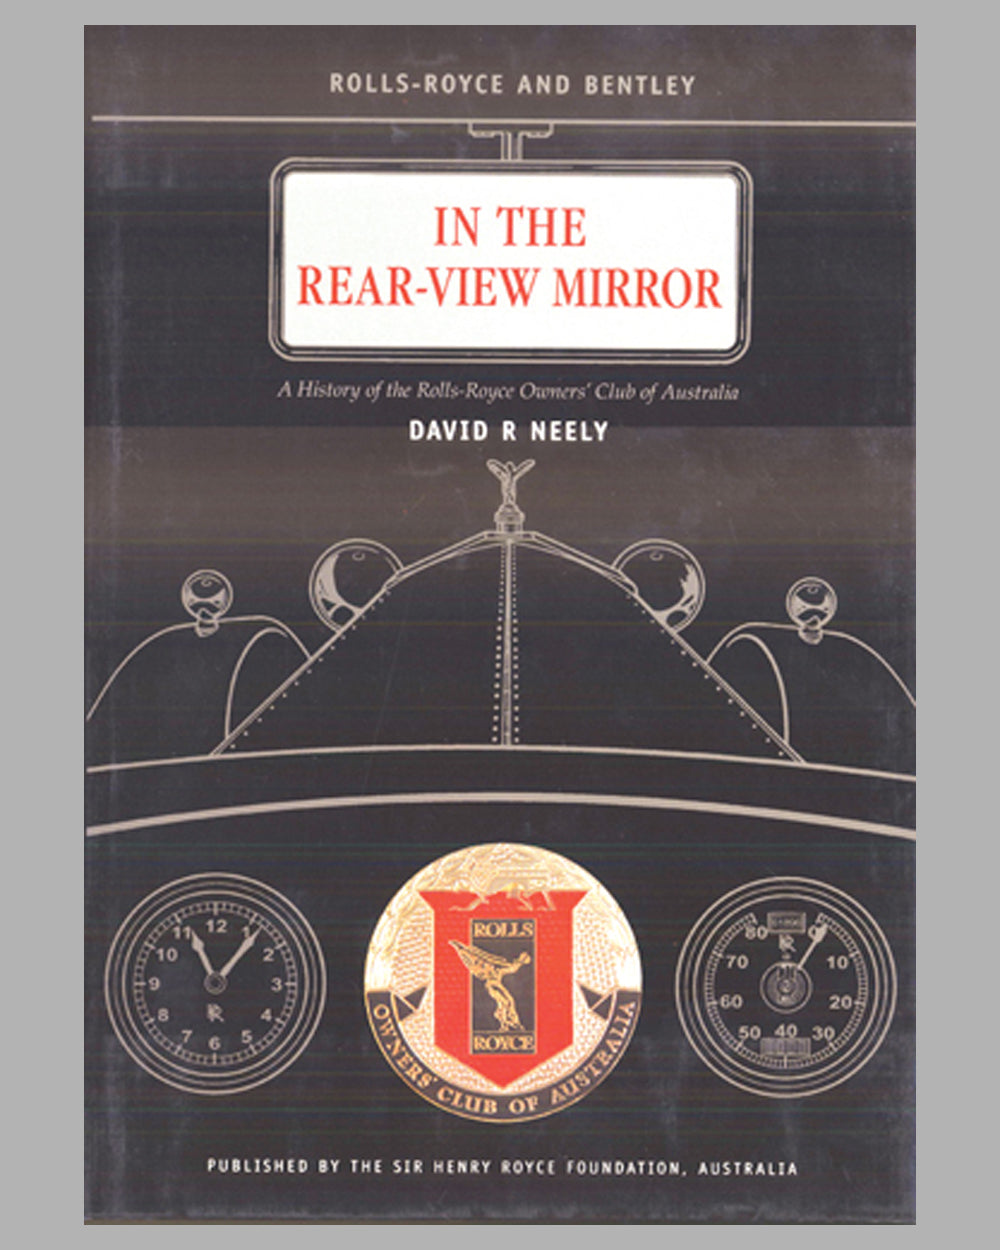 In The Rear-View Mirror-A History of the Rolls-Royce Owners’ Club of Australia book by David R. Neely, 1st ed., 2004